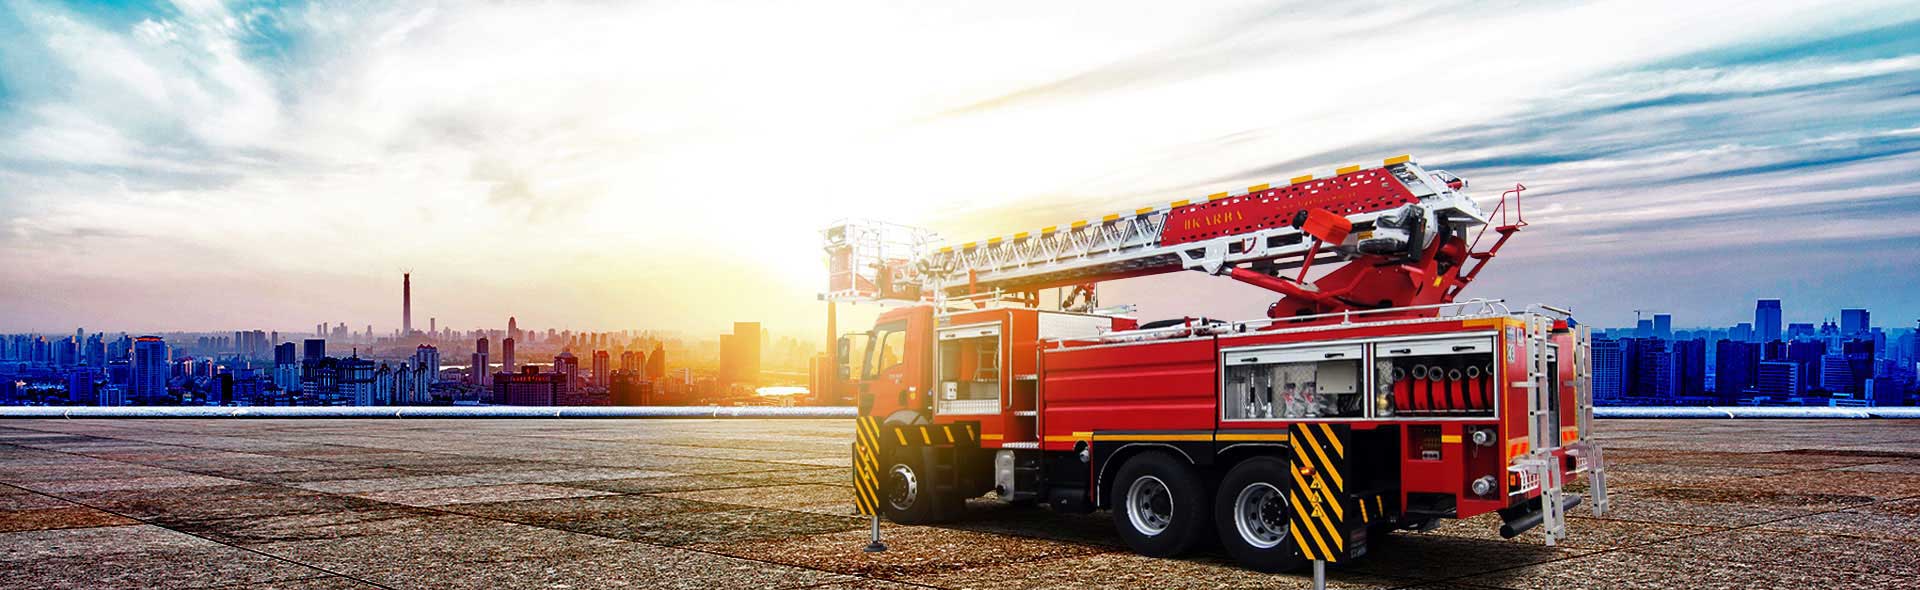 Hydraulic Ladder Fire Fighting Vehicles